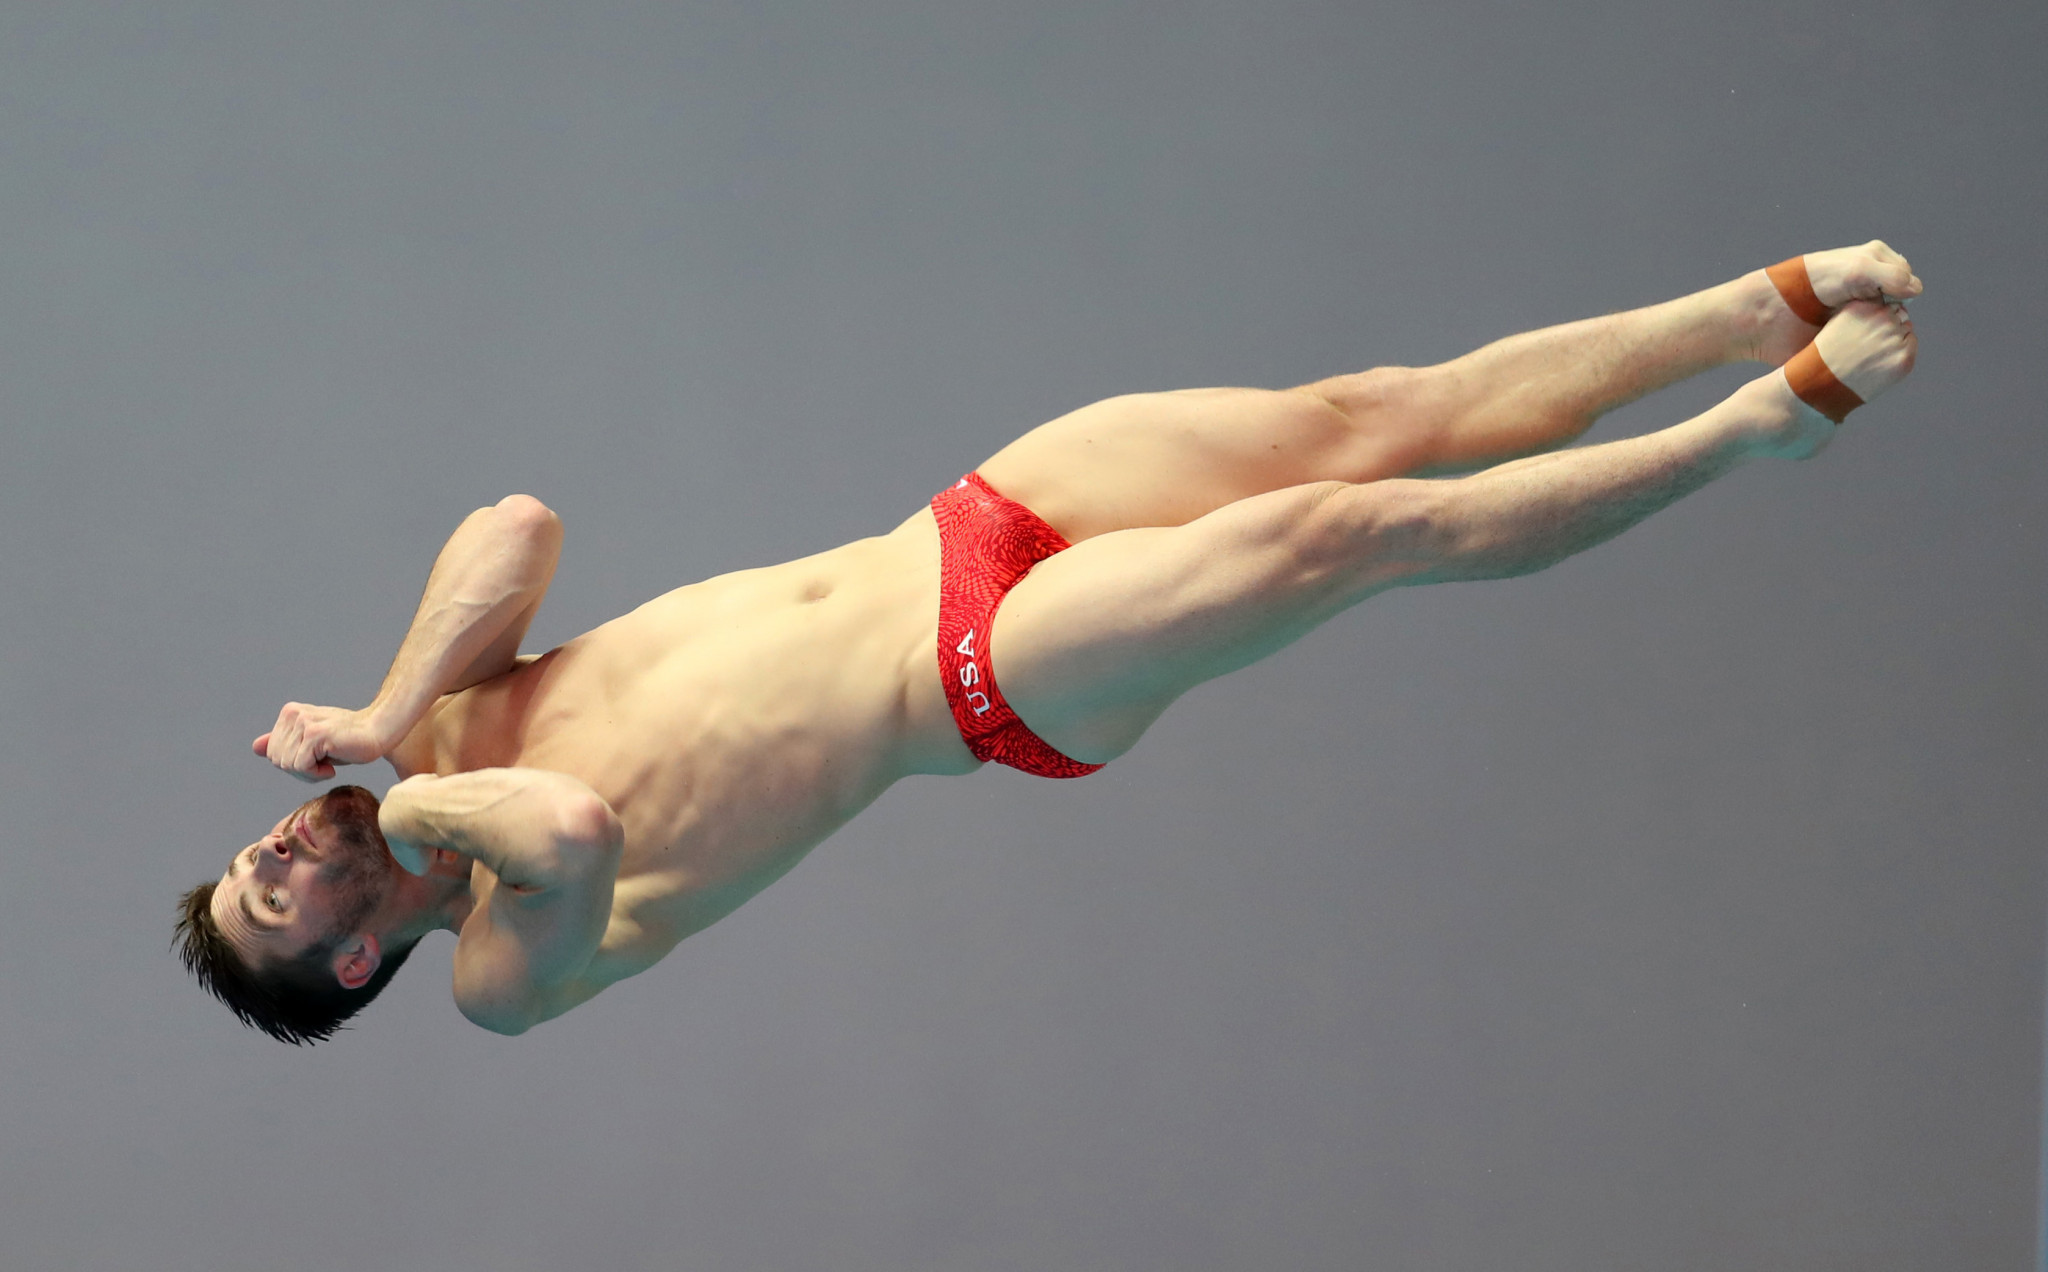 Funds raised will help grassroots and high-performance divers from the US ©Getty Images